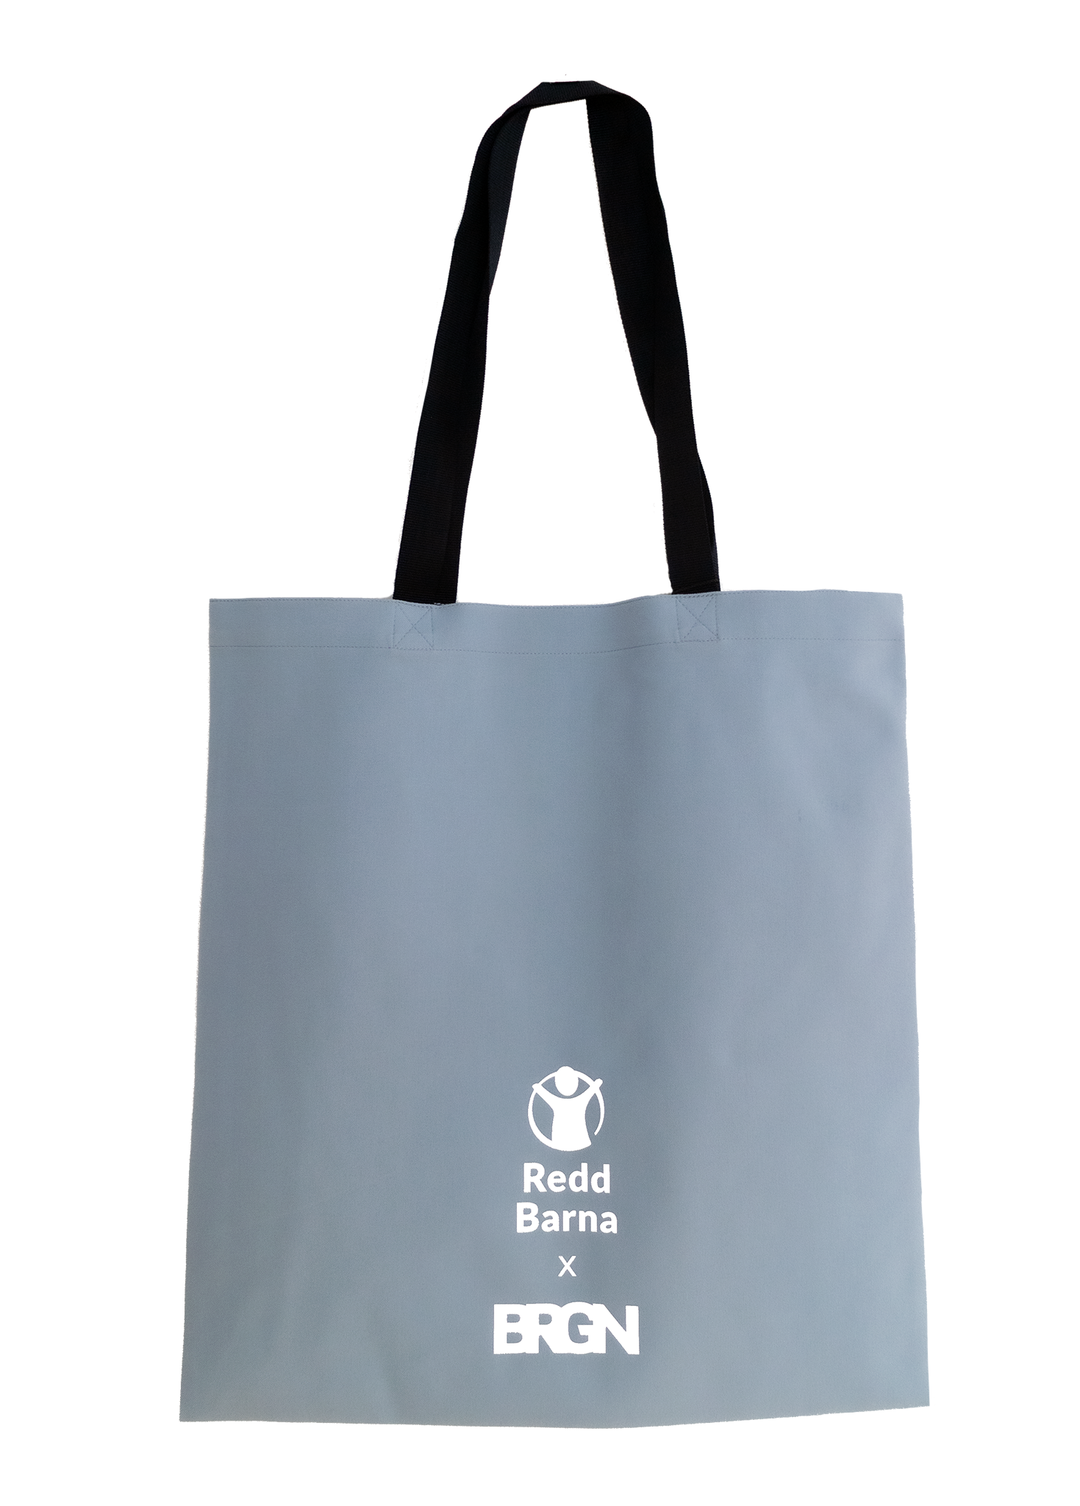 BRGN by Lunde & Gaundal BRGN Redd Barna Tote Bag Accessories 740 Steel Blue